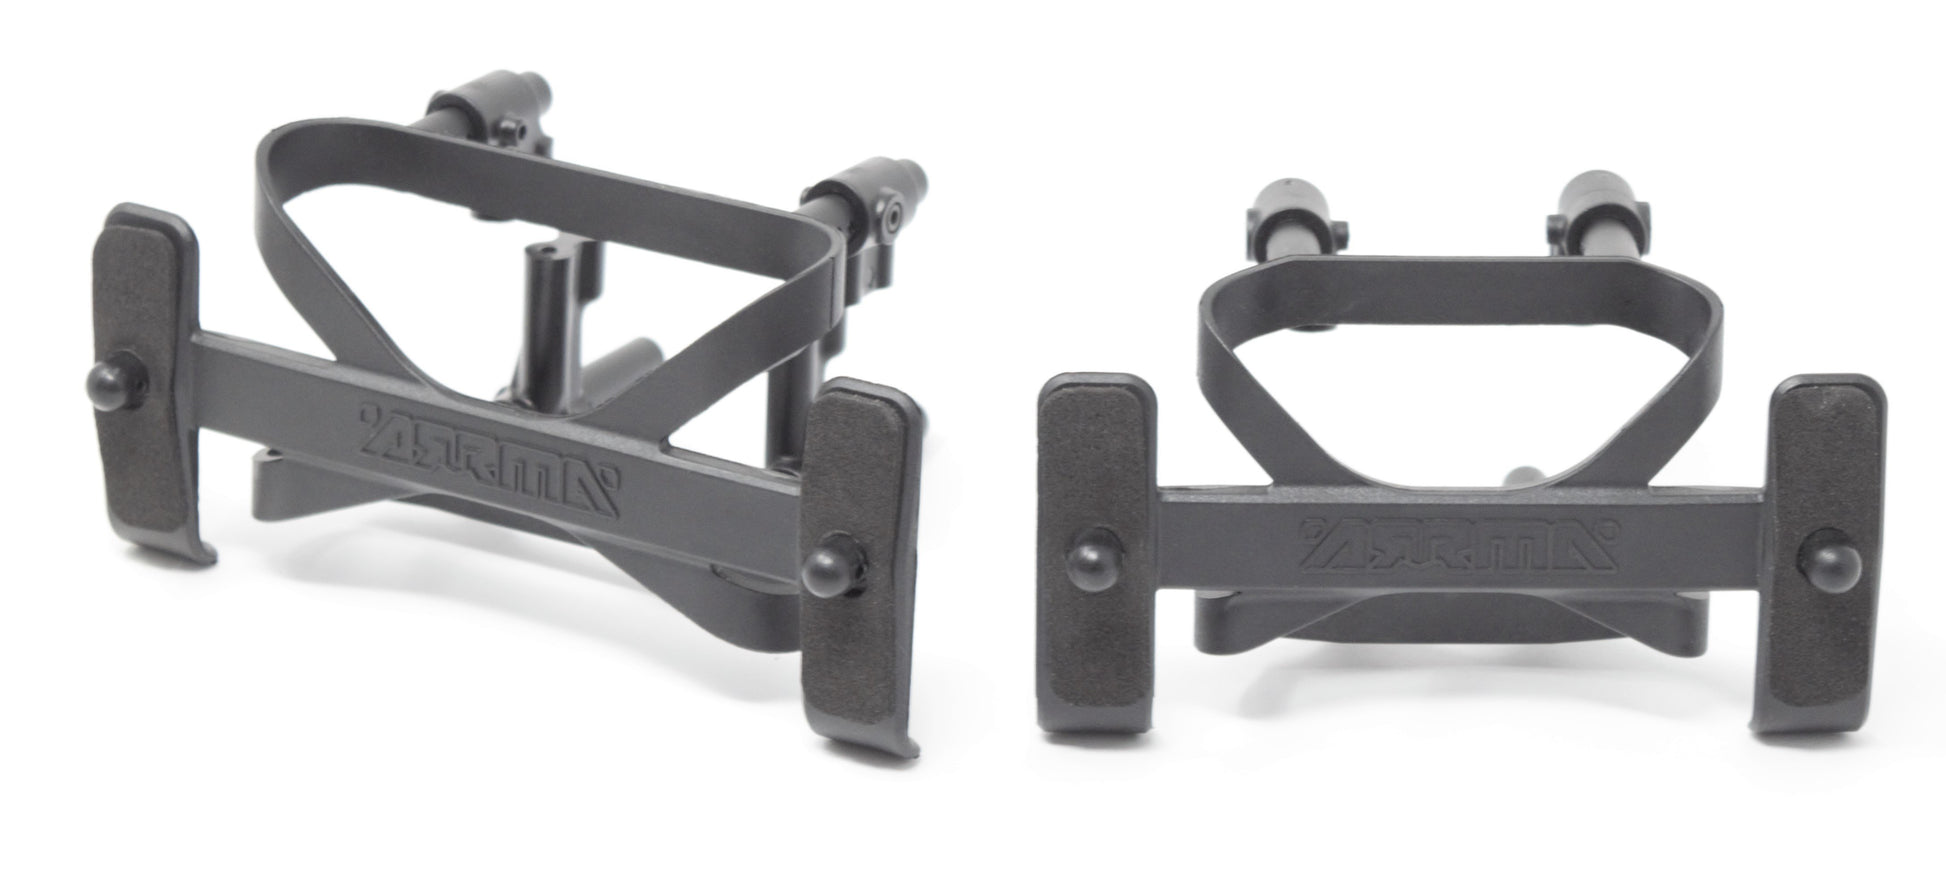 Arrma MOJAVE 6s BLX - Body Mount Set, posts front/rear composite AR106058 - Dirt Cheap RC SAVING YOU MONEY, ONE PART AT A TIME